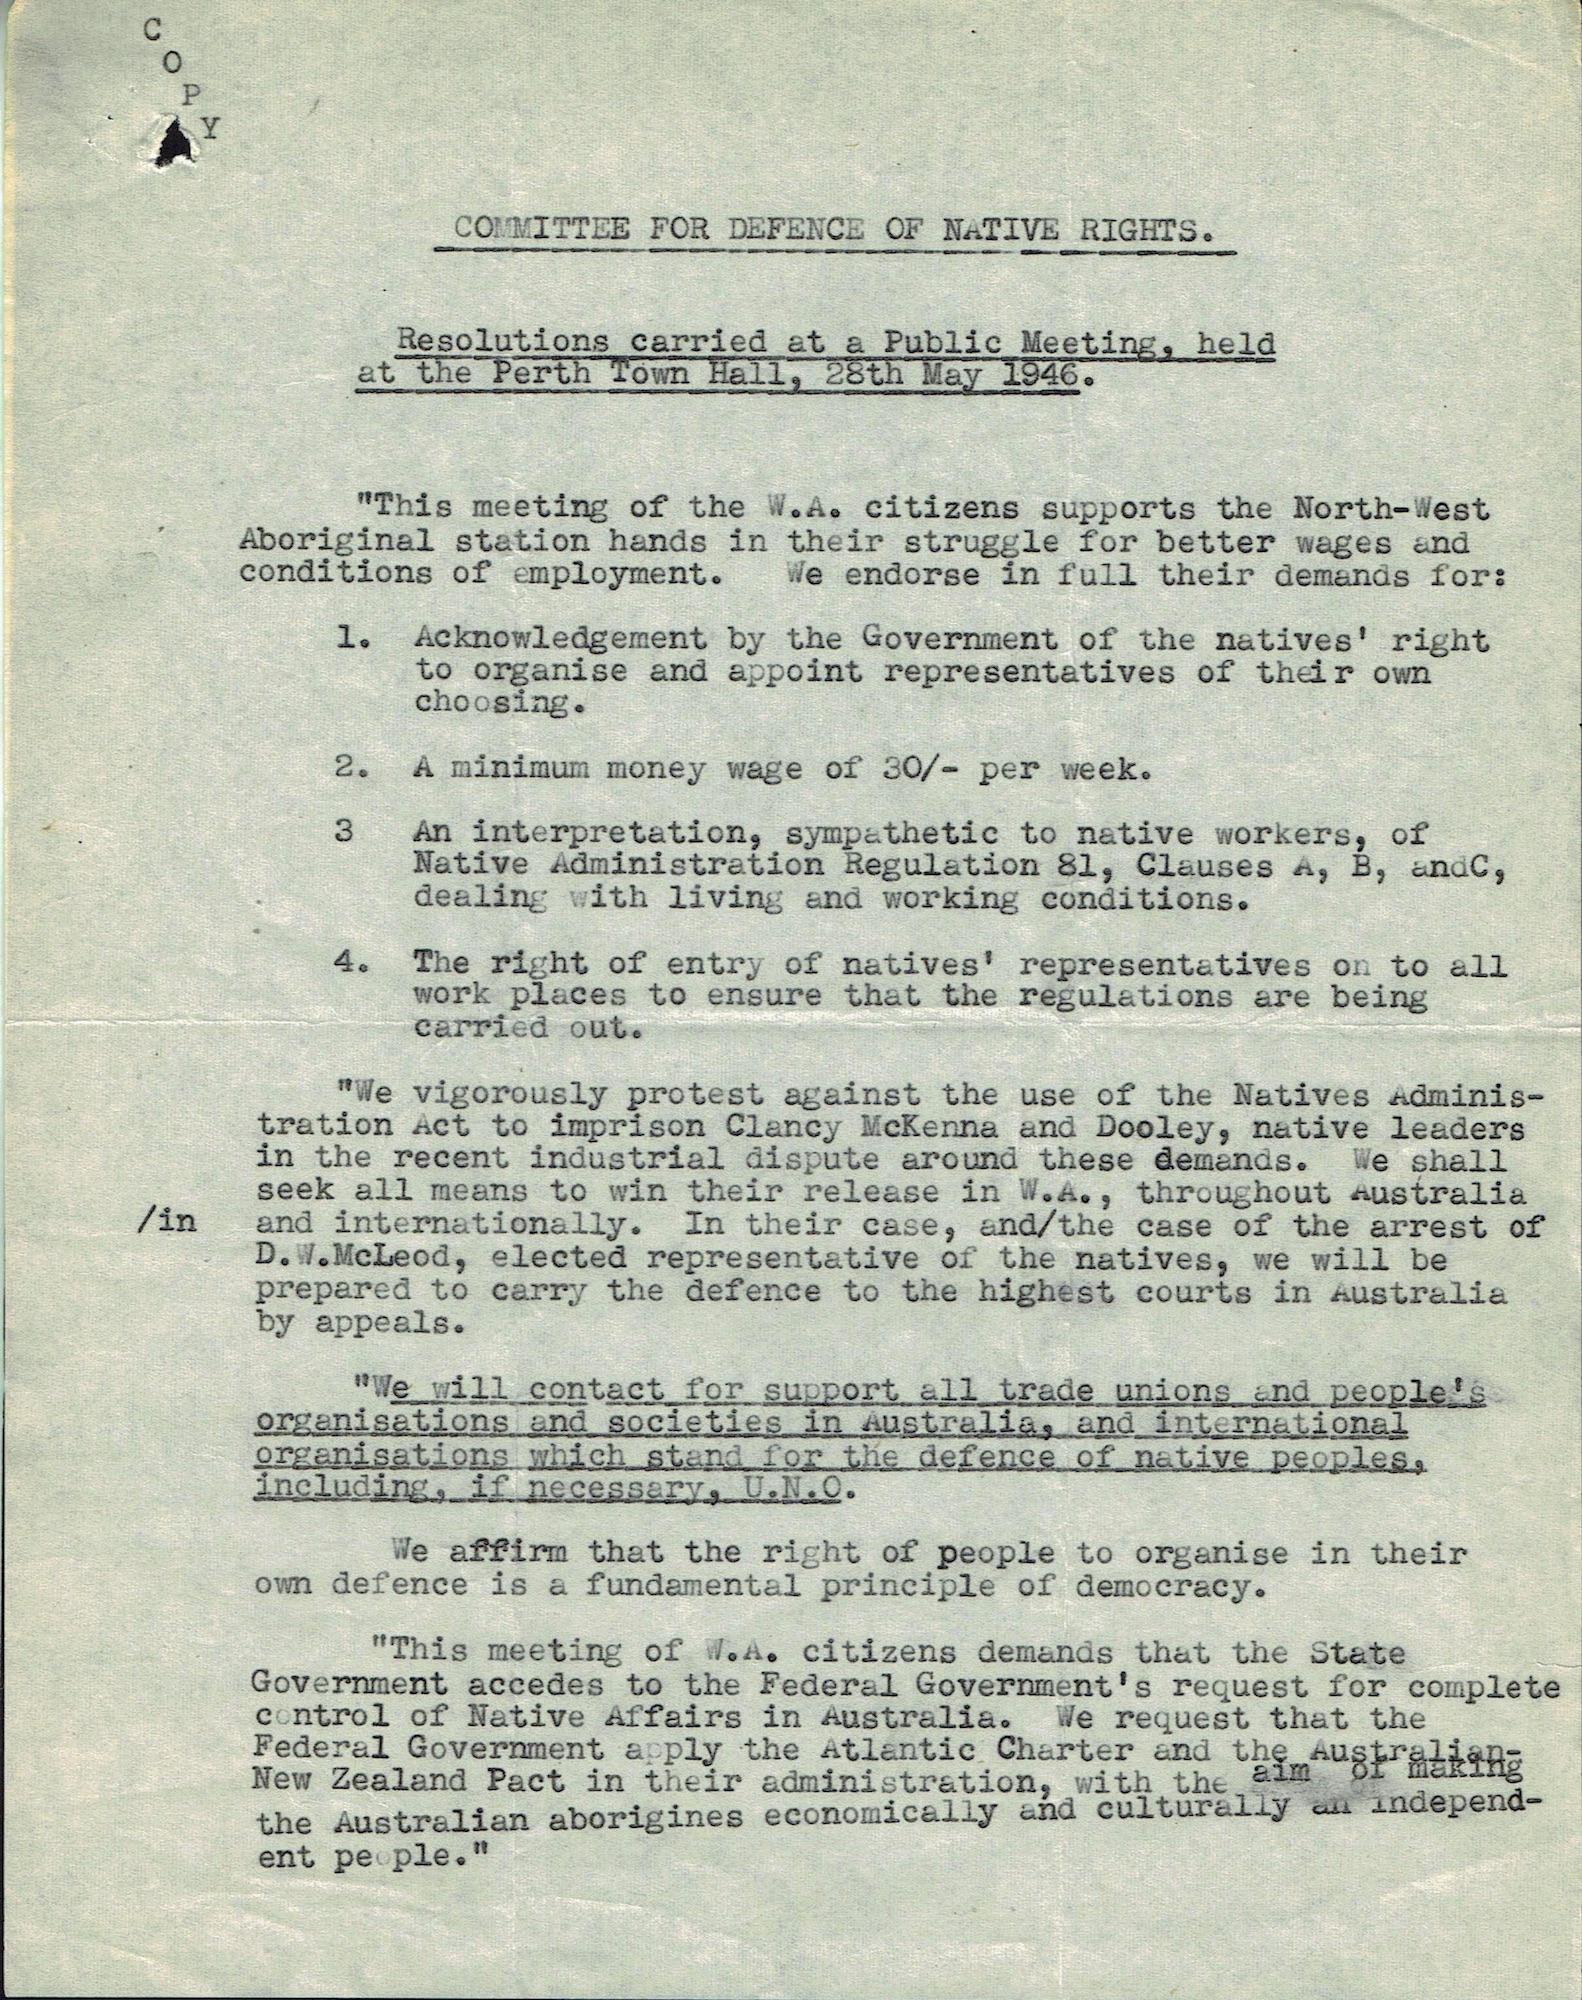 Committee for Defence of Native Rights, 28 May 1946, Resolutions of a Meeting